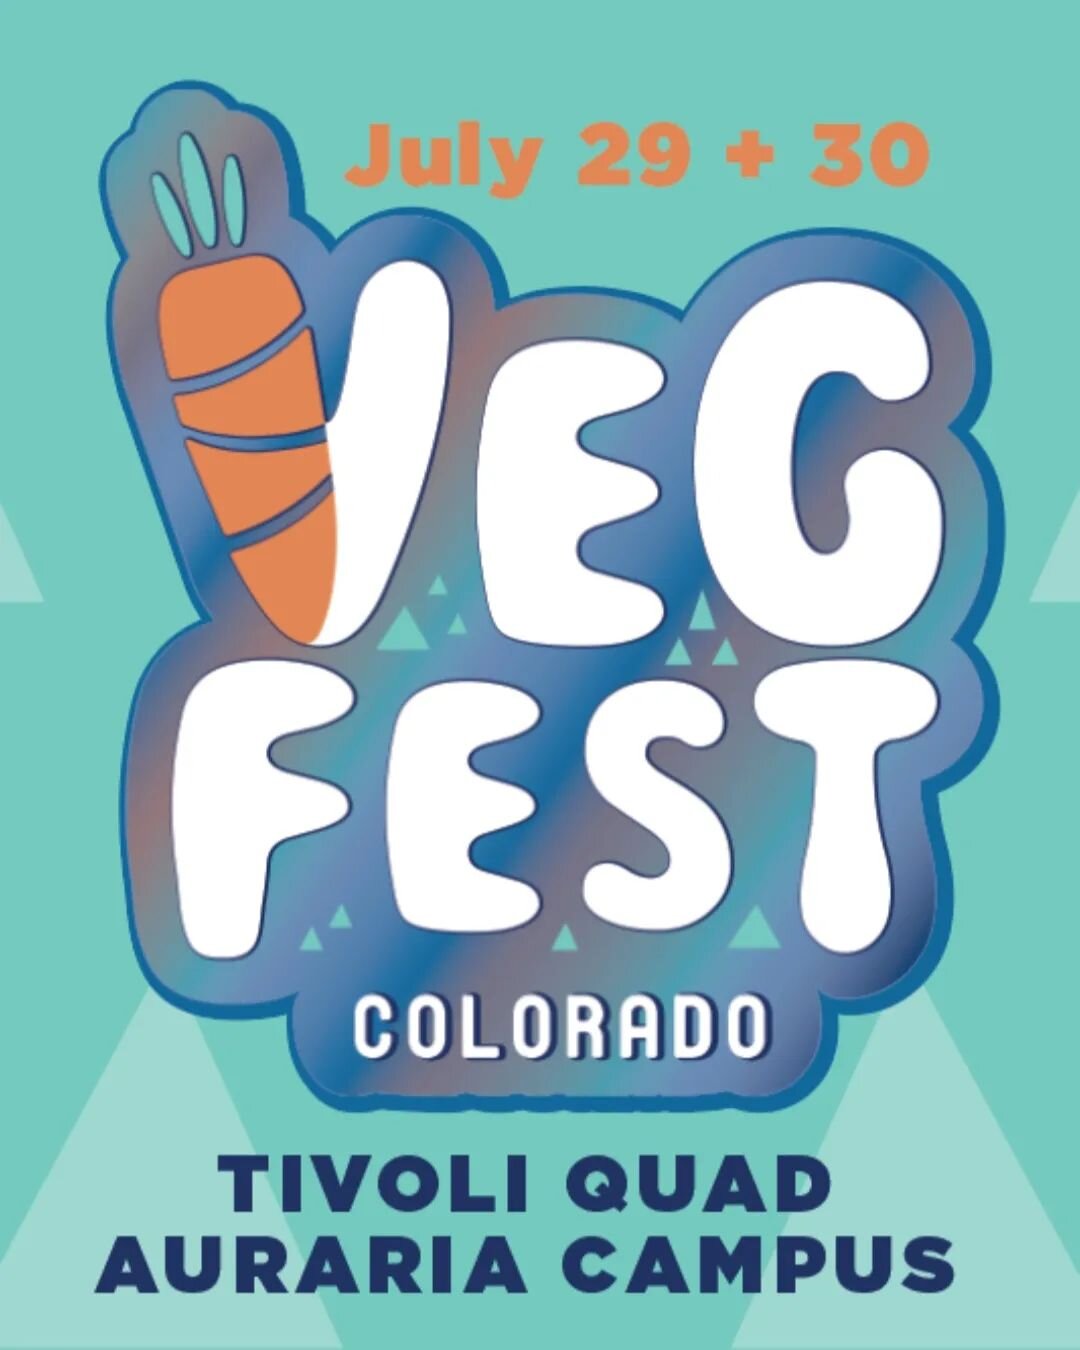 Save the date: Sunday, July 30th! All of the plants-based options you could dream of! We will be there Sunday but I would highly encourage you to check out both days.

Make sure you get your tickets ahead of time to save some money!

https://www.vegf